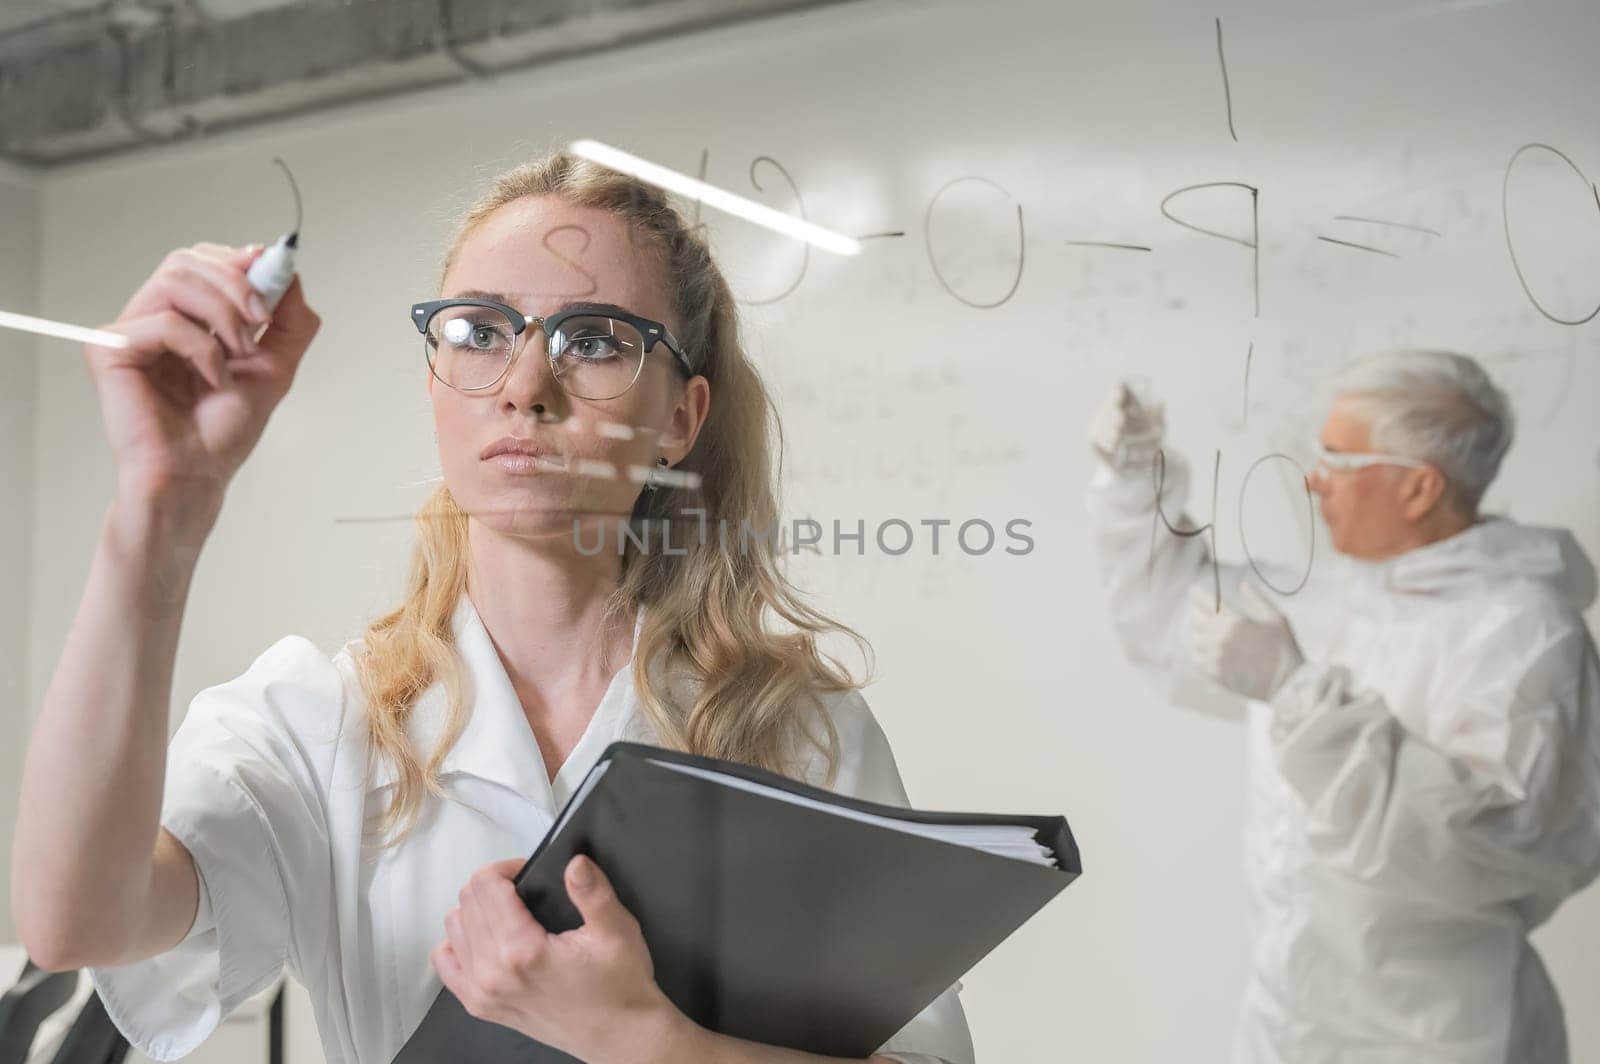 A woman chemist writes a formula on glass. An elderly Caucasian man in a protective suit is doing tests. by mrwed54